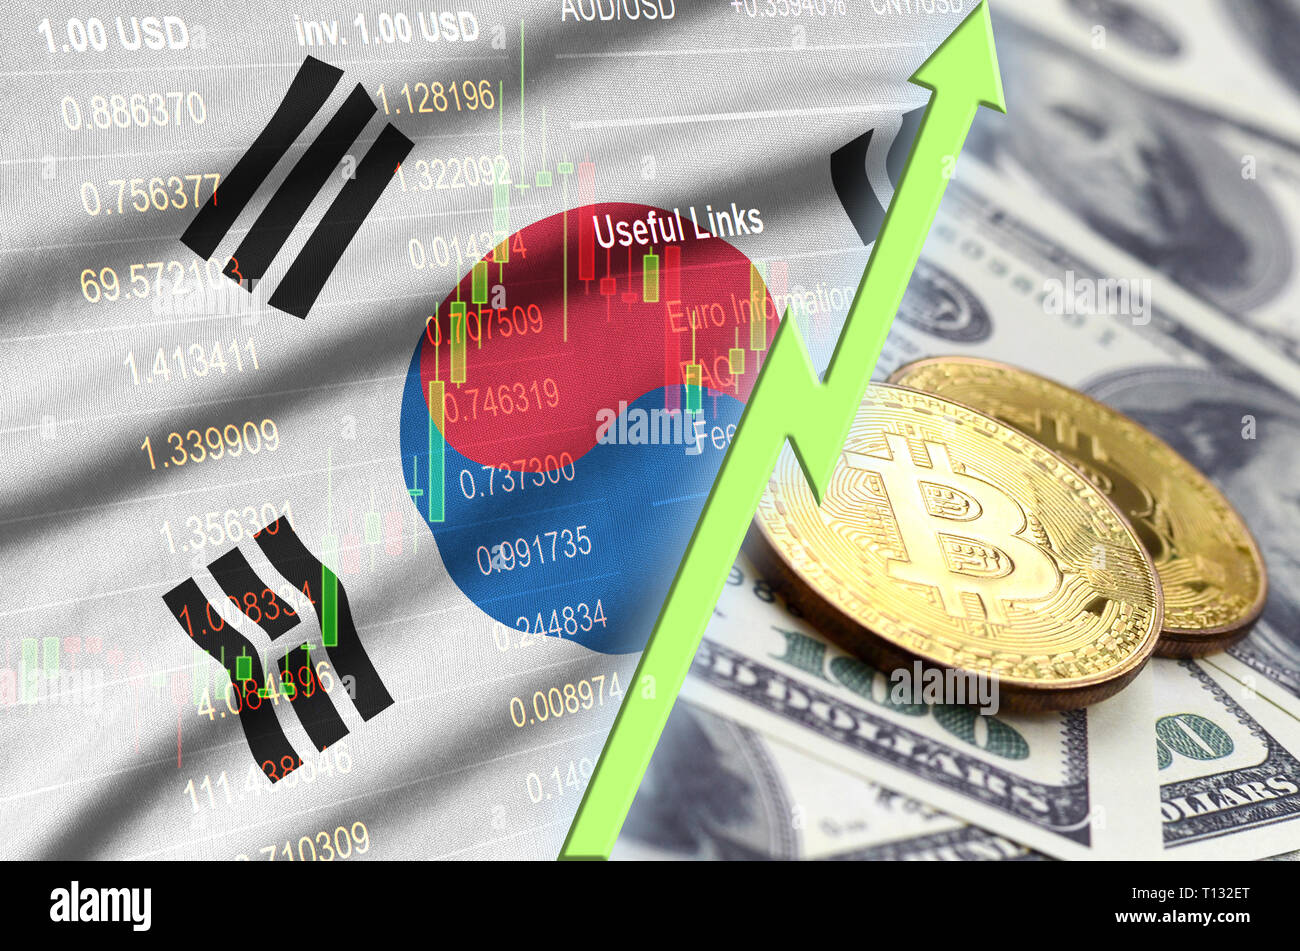 South Korea Flag And Cryptocurrency Growing Trend With Two Bitcoins - 